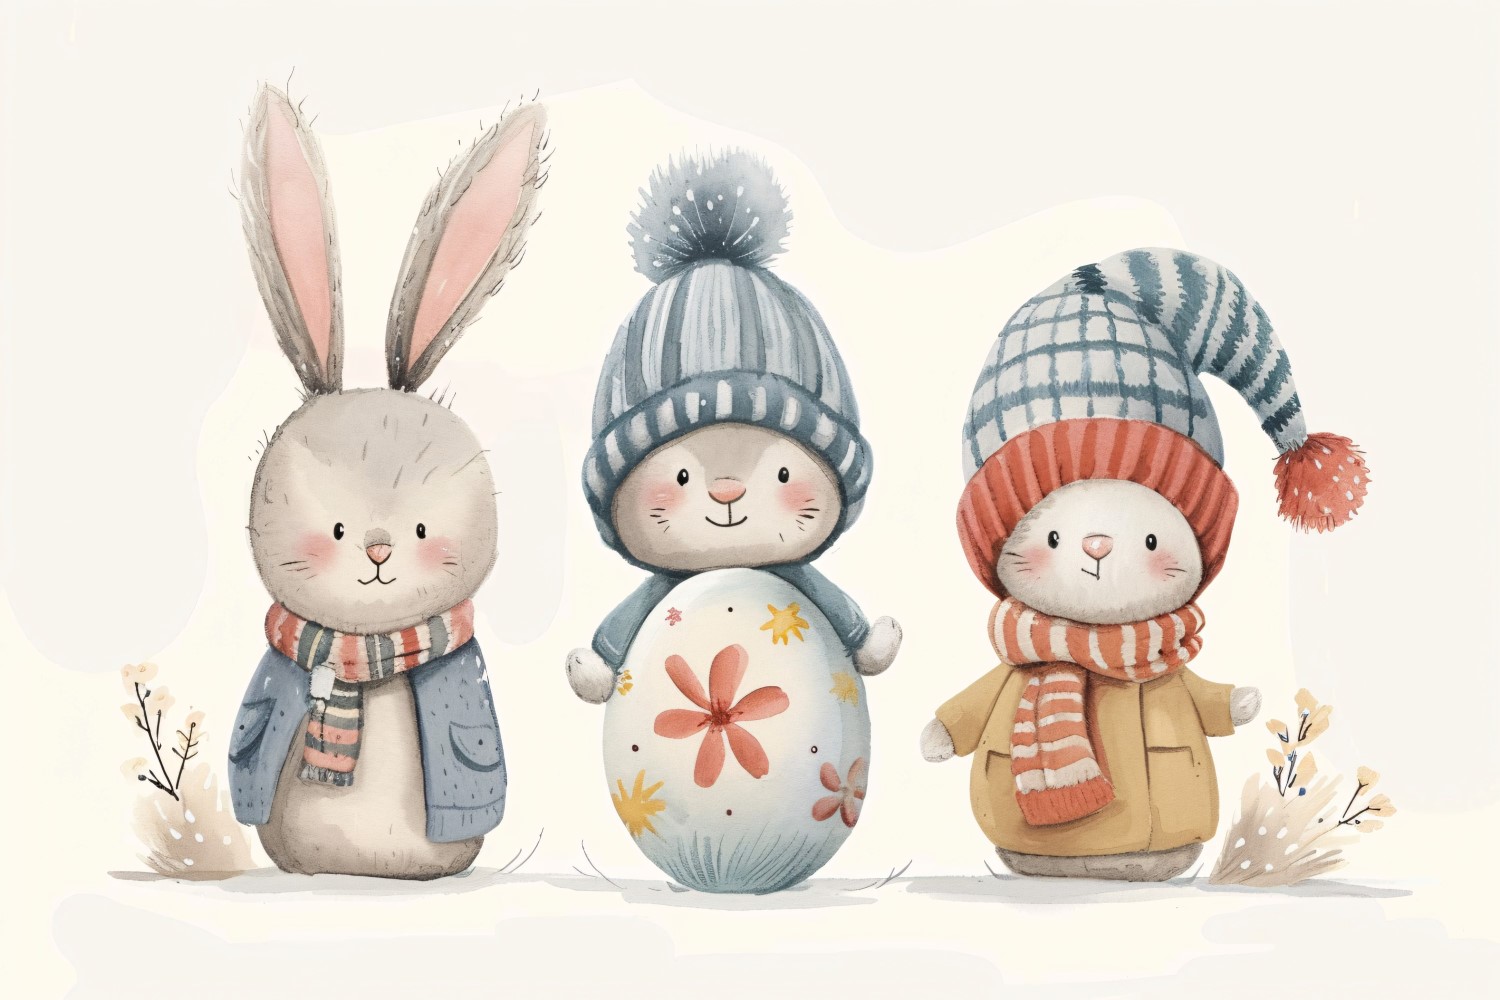 Watercolour Easter Bunnies With Colourful Easter Eggs 73